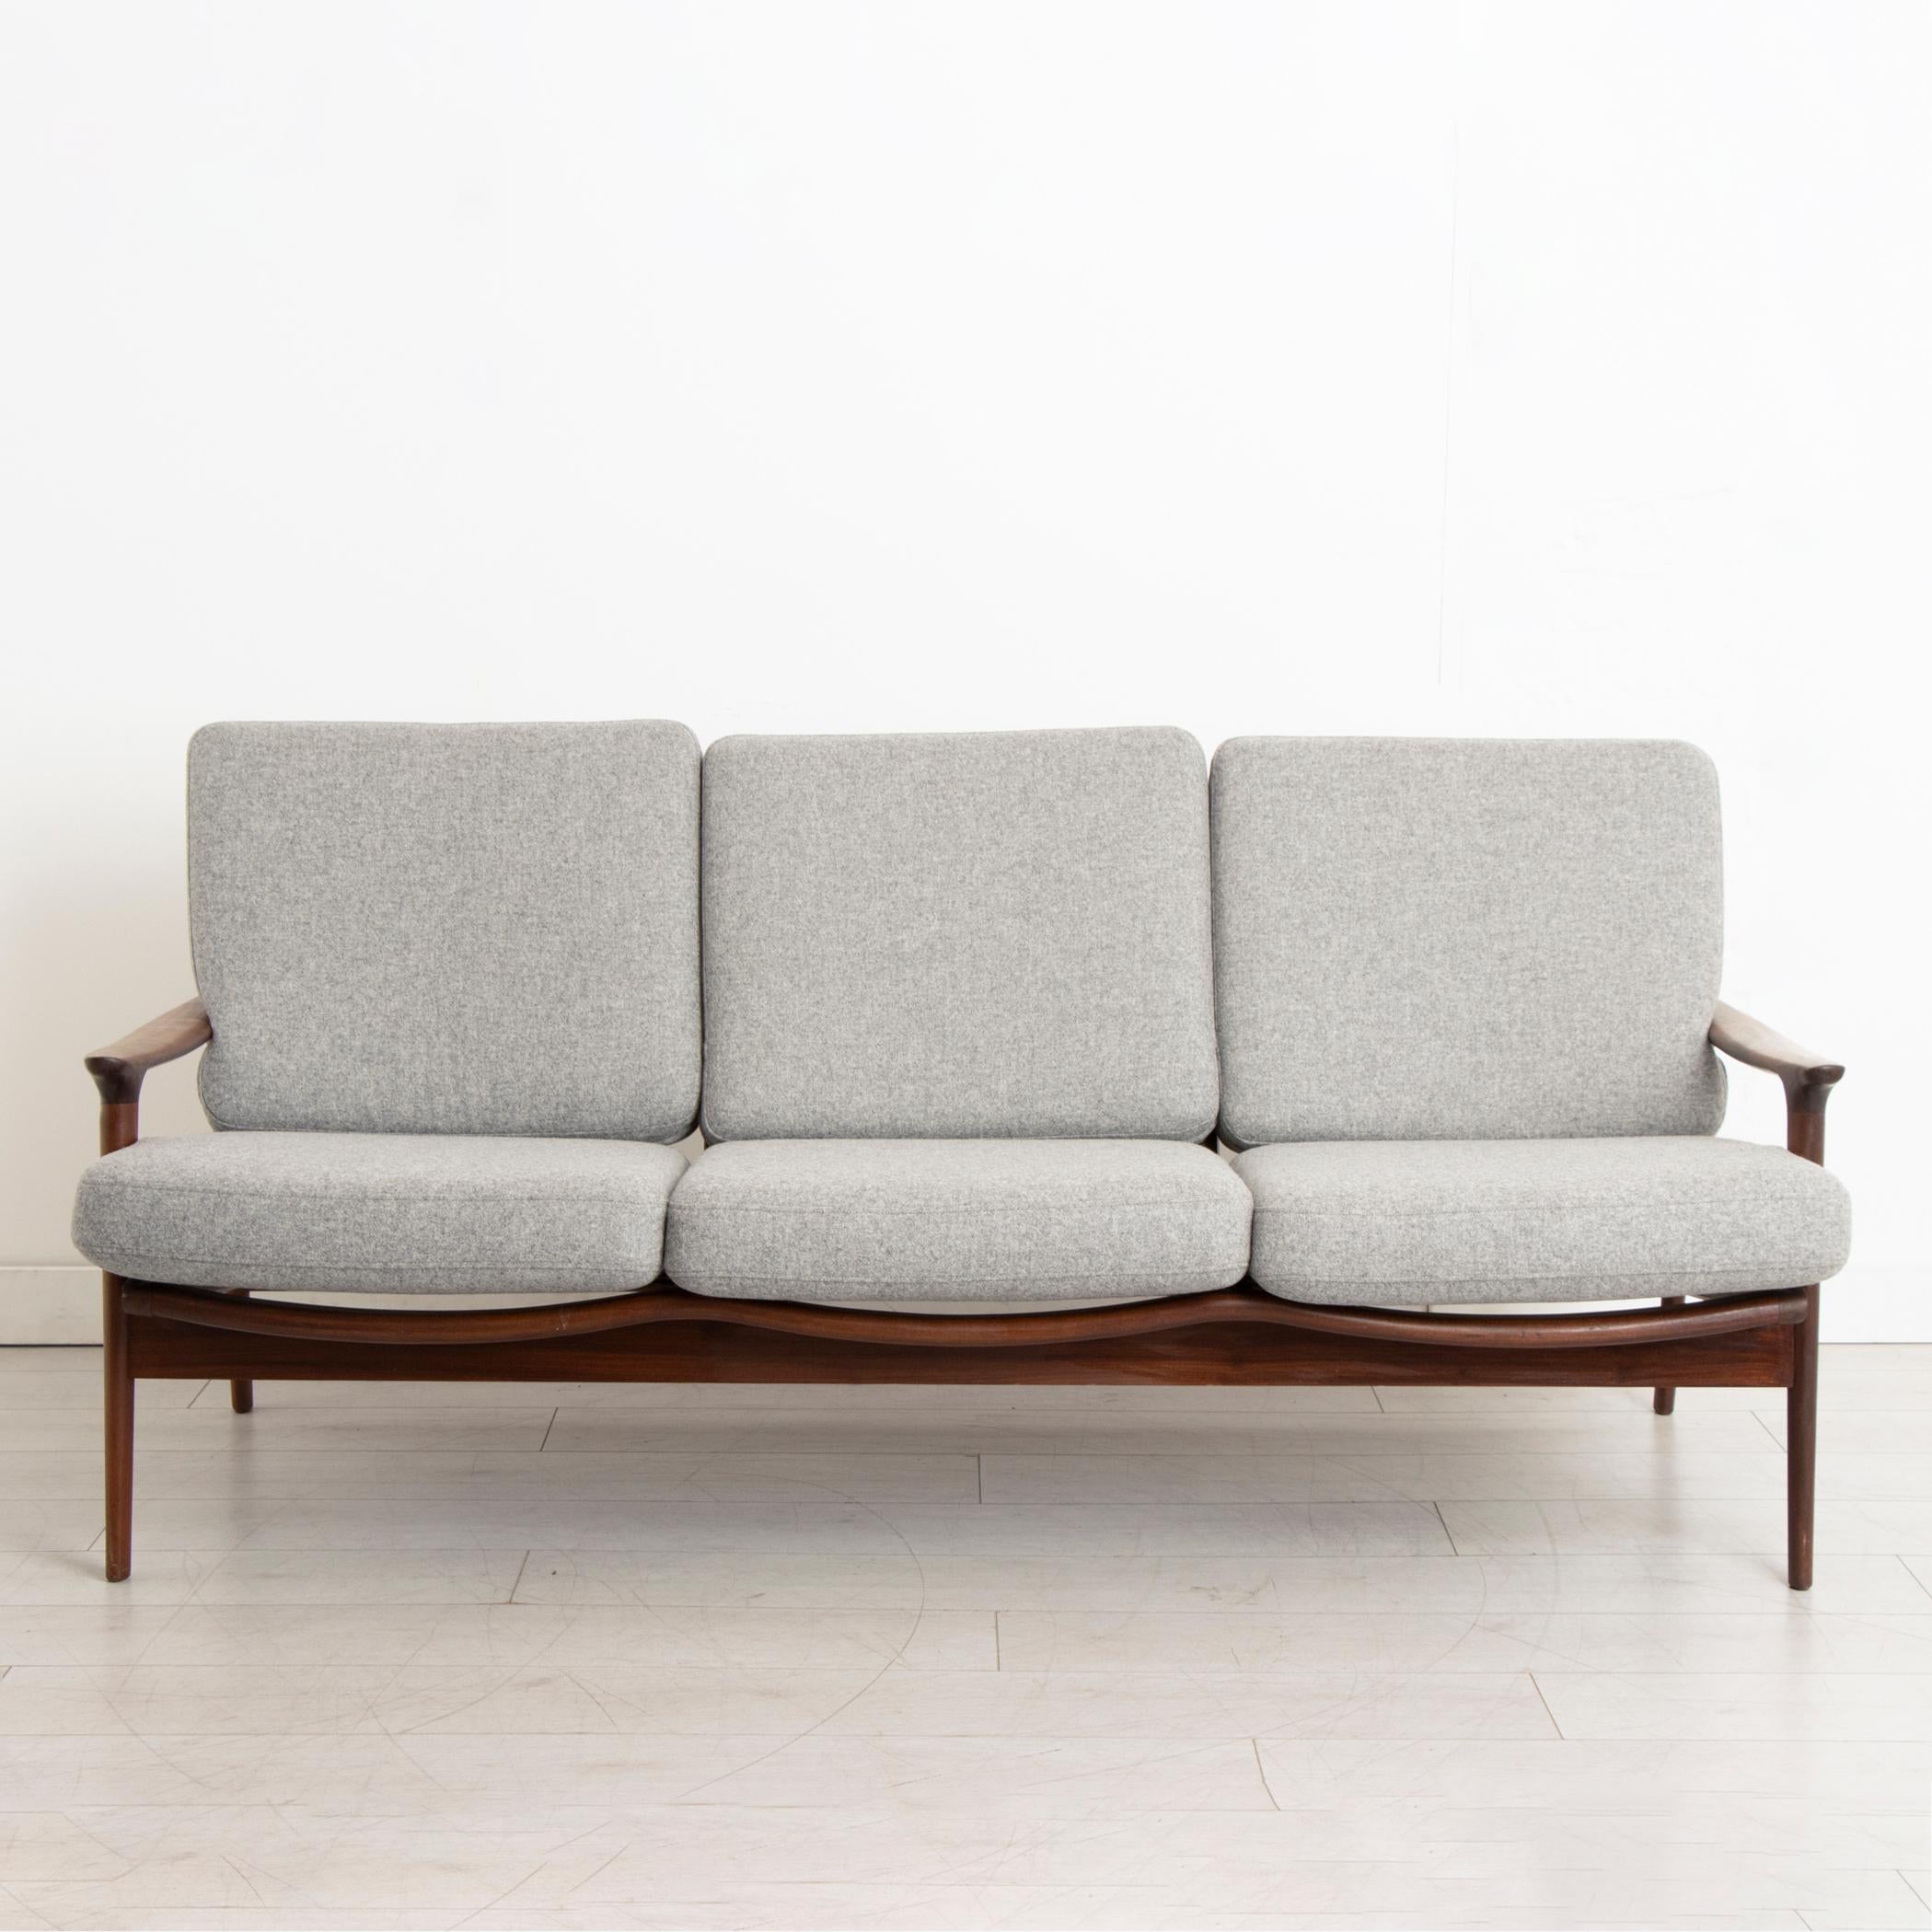 

A midcentury living room suite designed by Guy Rogers. The suite is part of the New Yorker range designed in the 1960s and includes a three-seater sofa and a pair of his and her armchairs. Made in solid afrormosia with new webbing and cushions